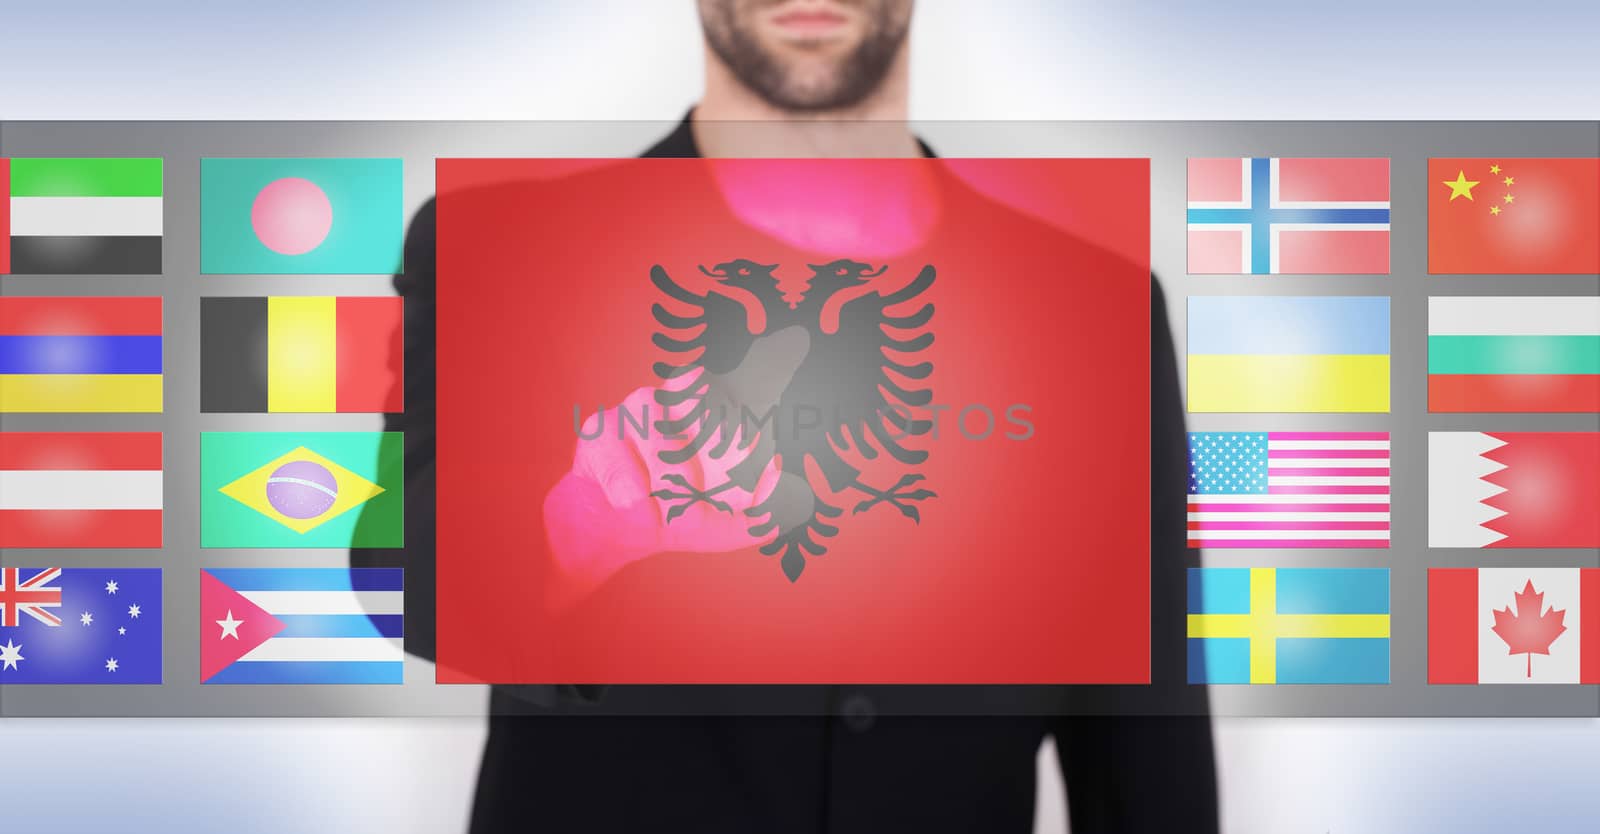 Hand pushing on a touch screen interface, choosing language or country, Albania